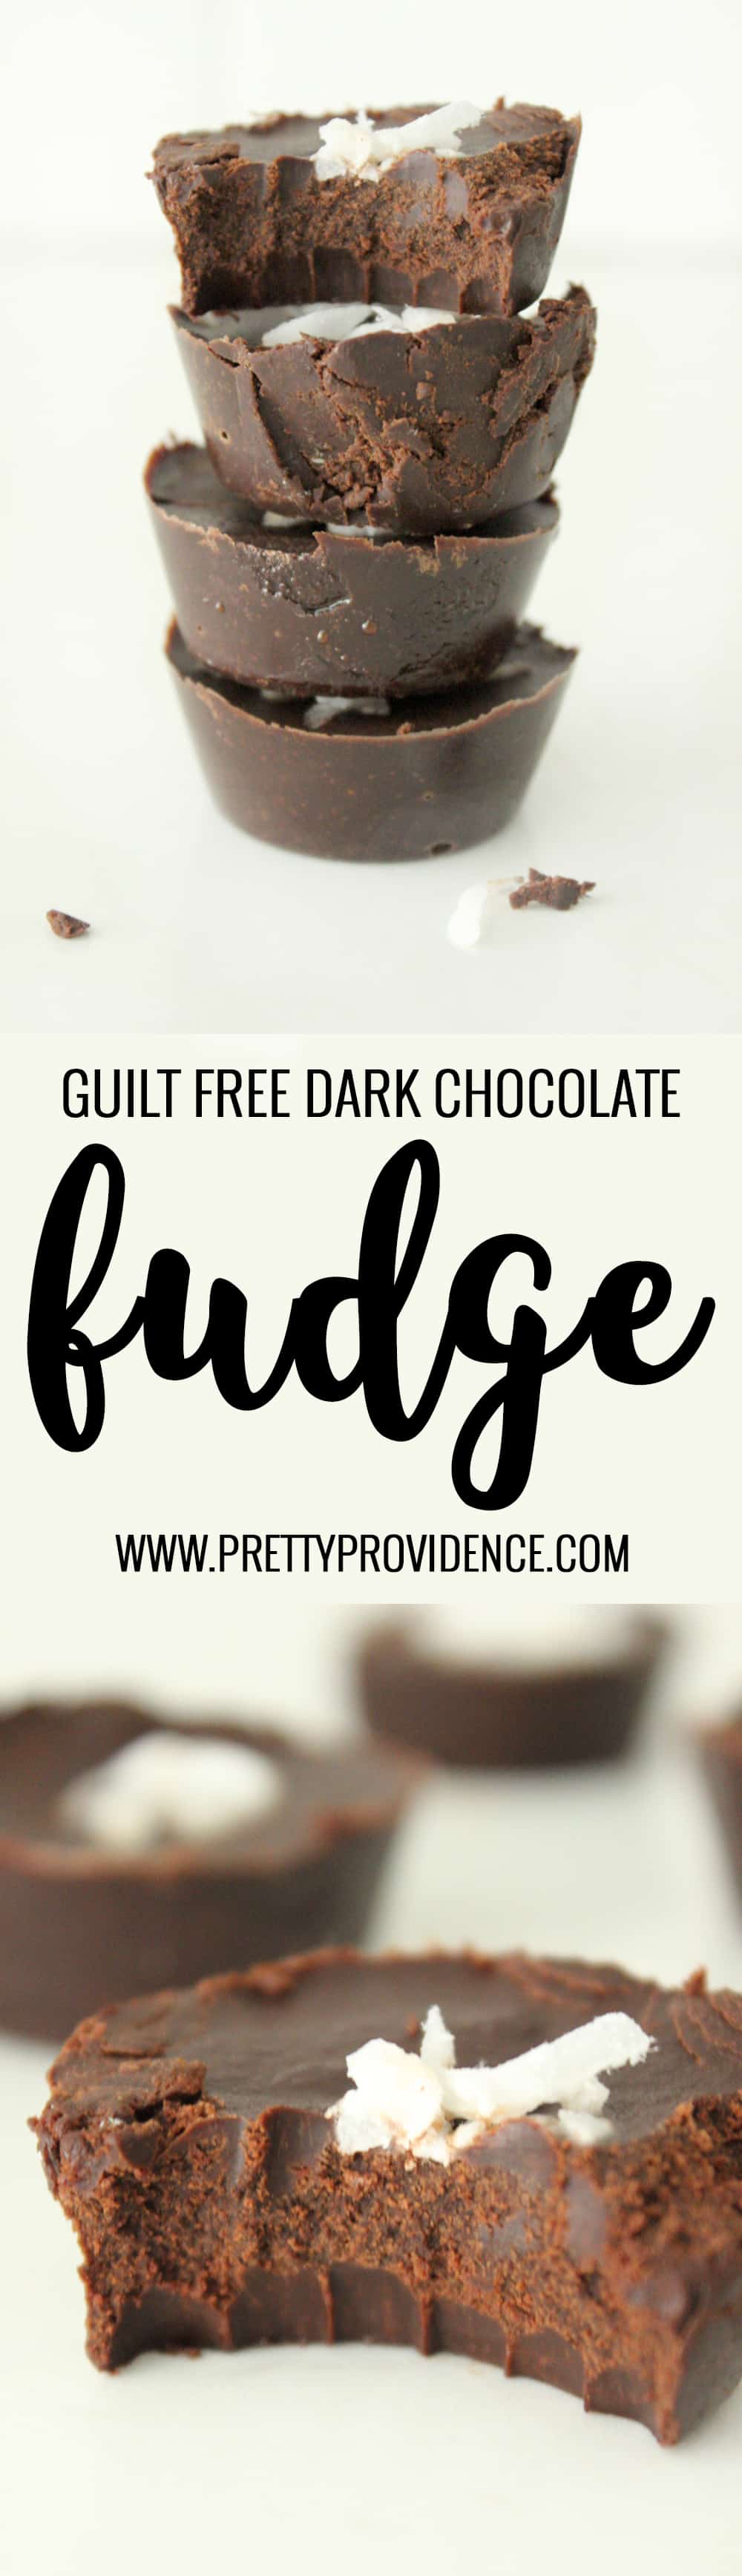 Absolutely amazing guilt free dark chocolate fudge! Can be made vegan, paleo or sugar free! Tastes just like a dark chocolate truffle- perfect melt in your mouth texture! You won't regret trying out this one! 